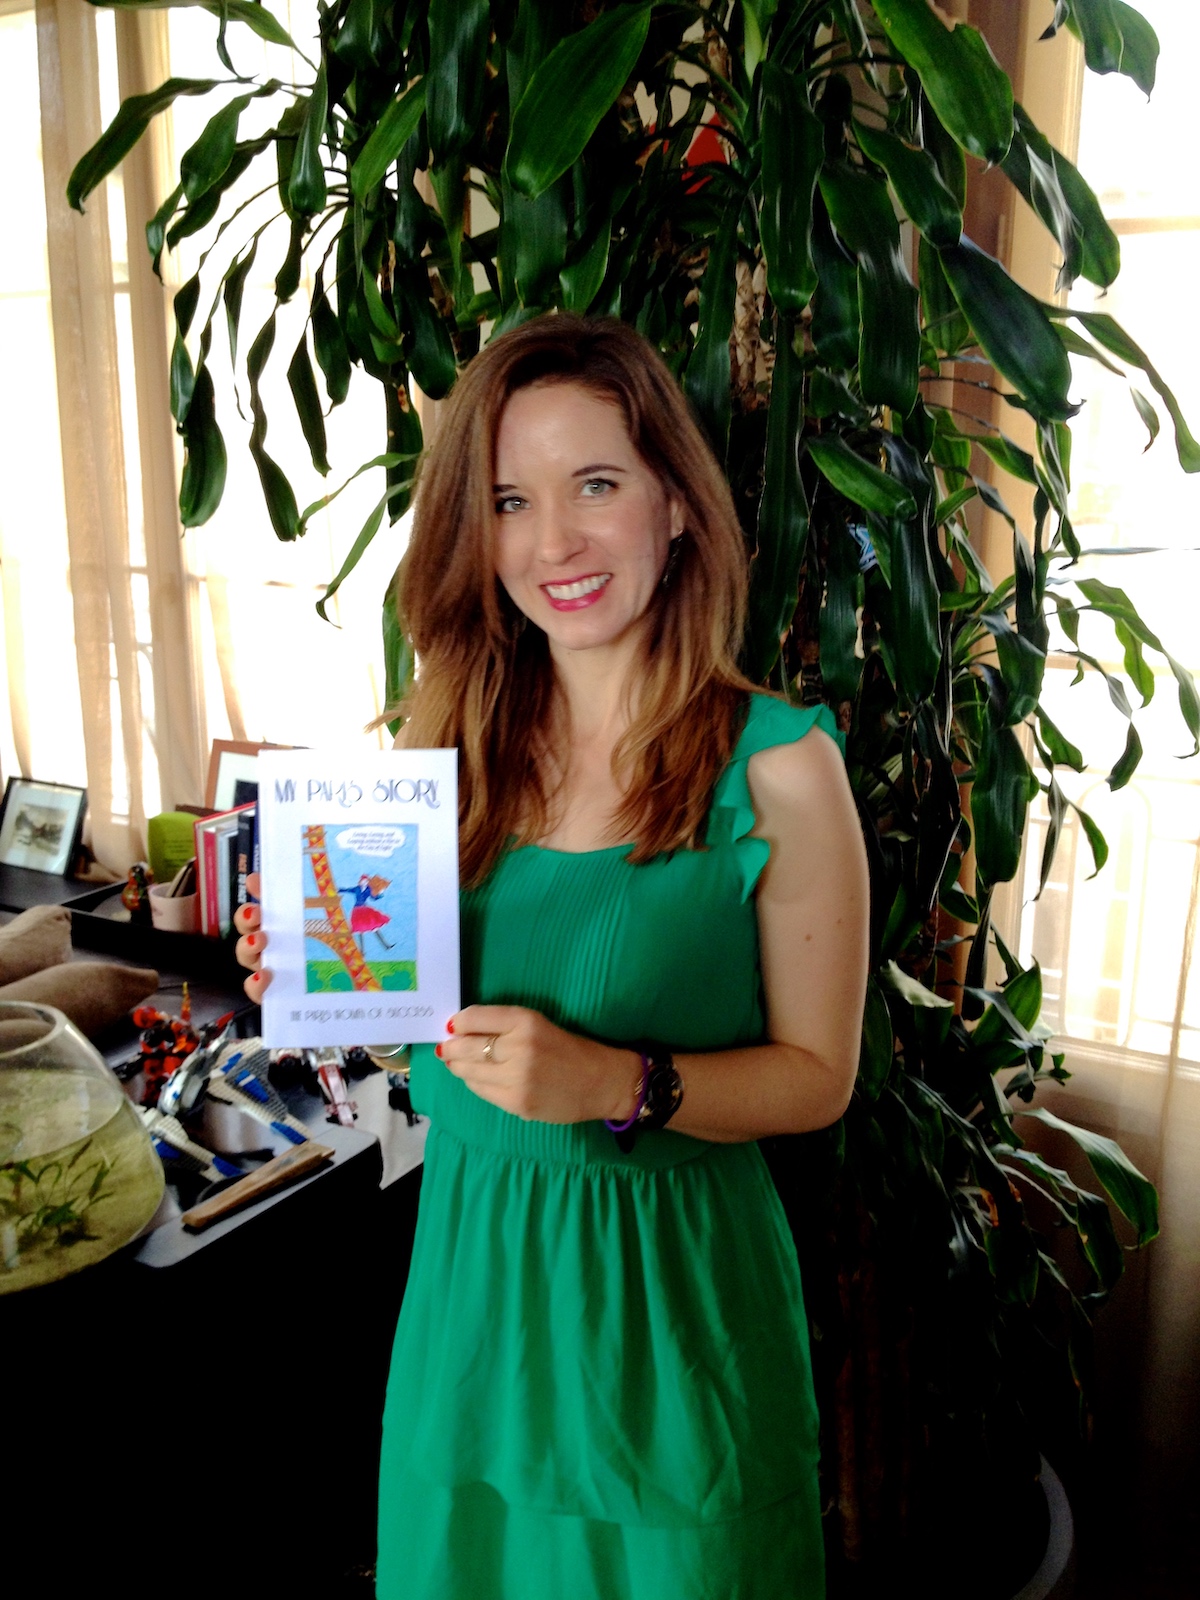 Julia, blogger of Falling Off Bicycles, holding her book, My Paris Story